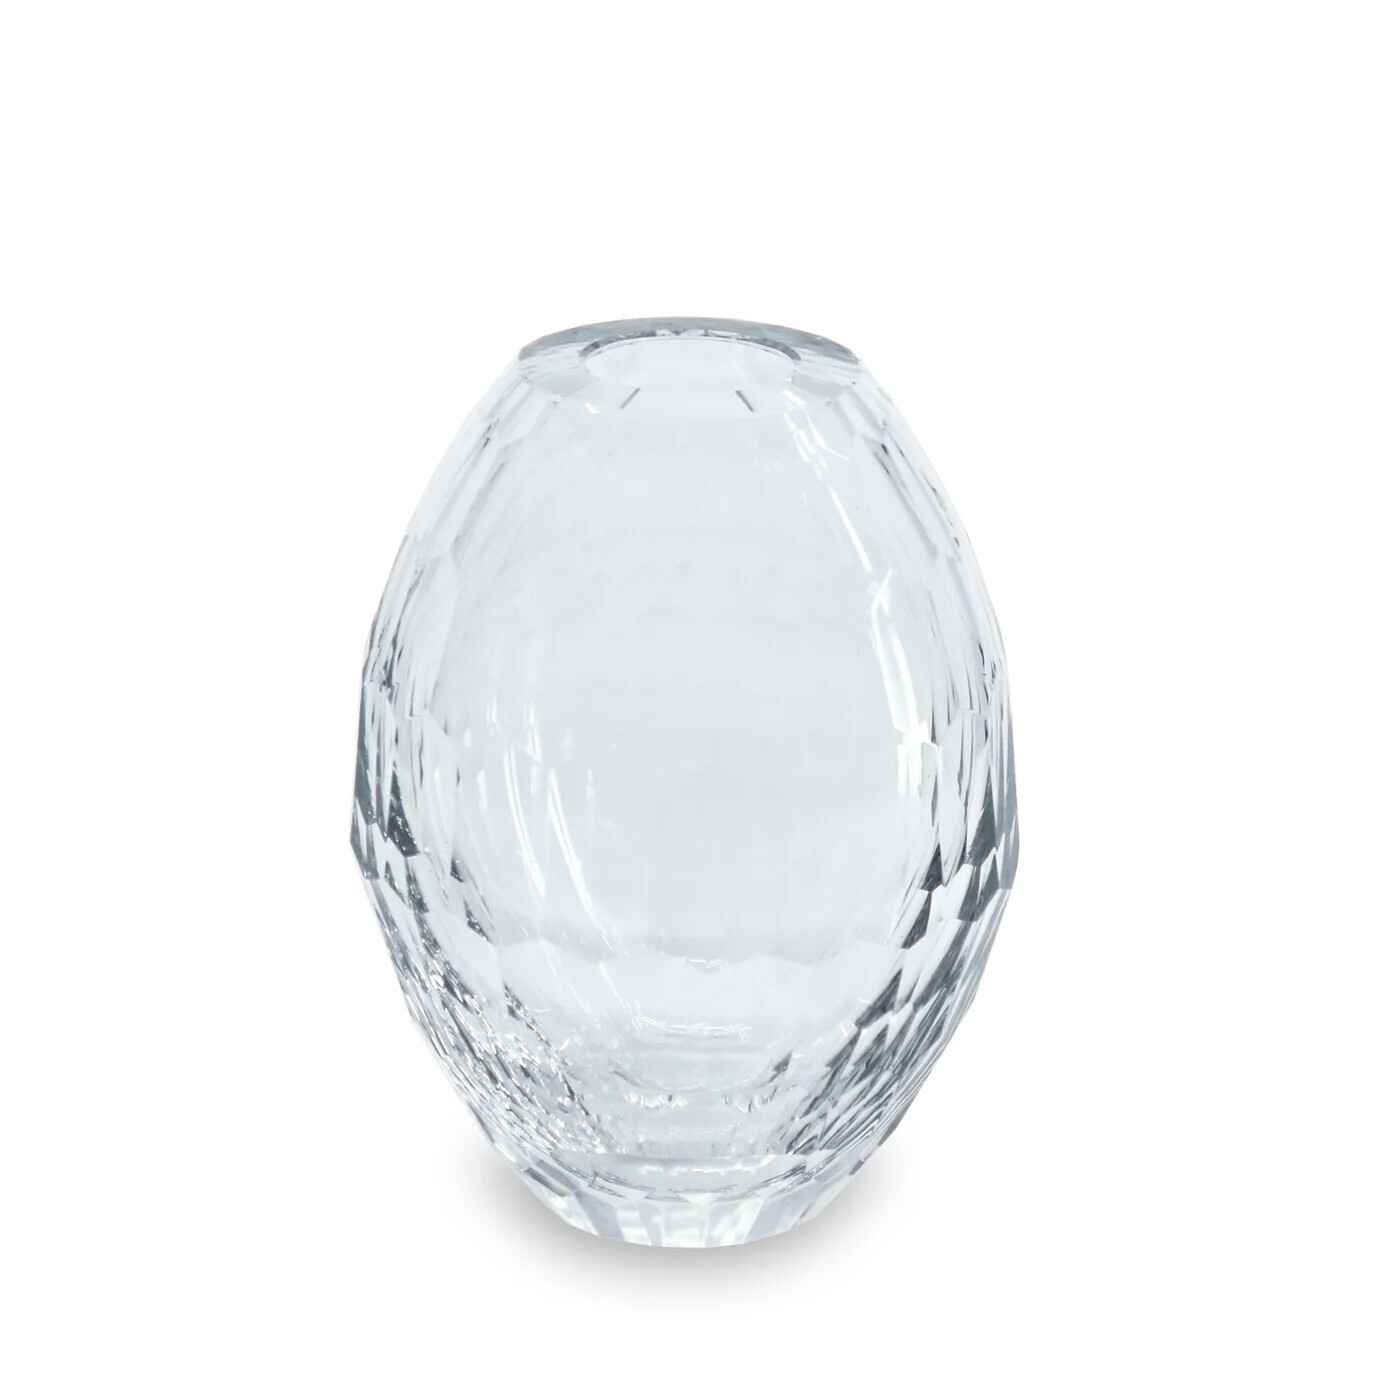 GLASS Faceted Teardrop Bud Vase (Clear)